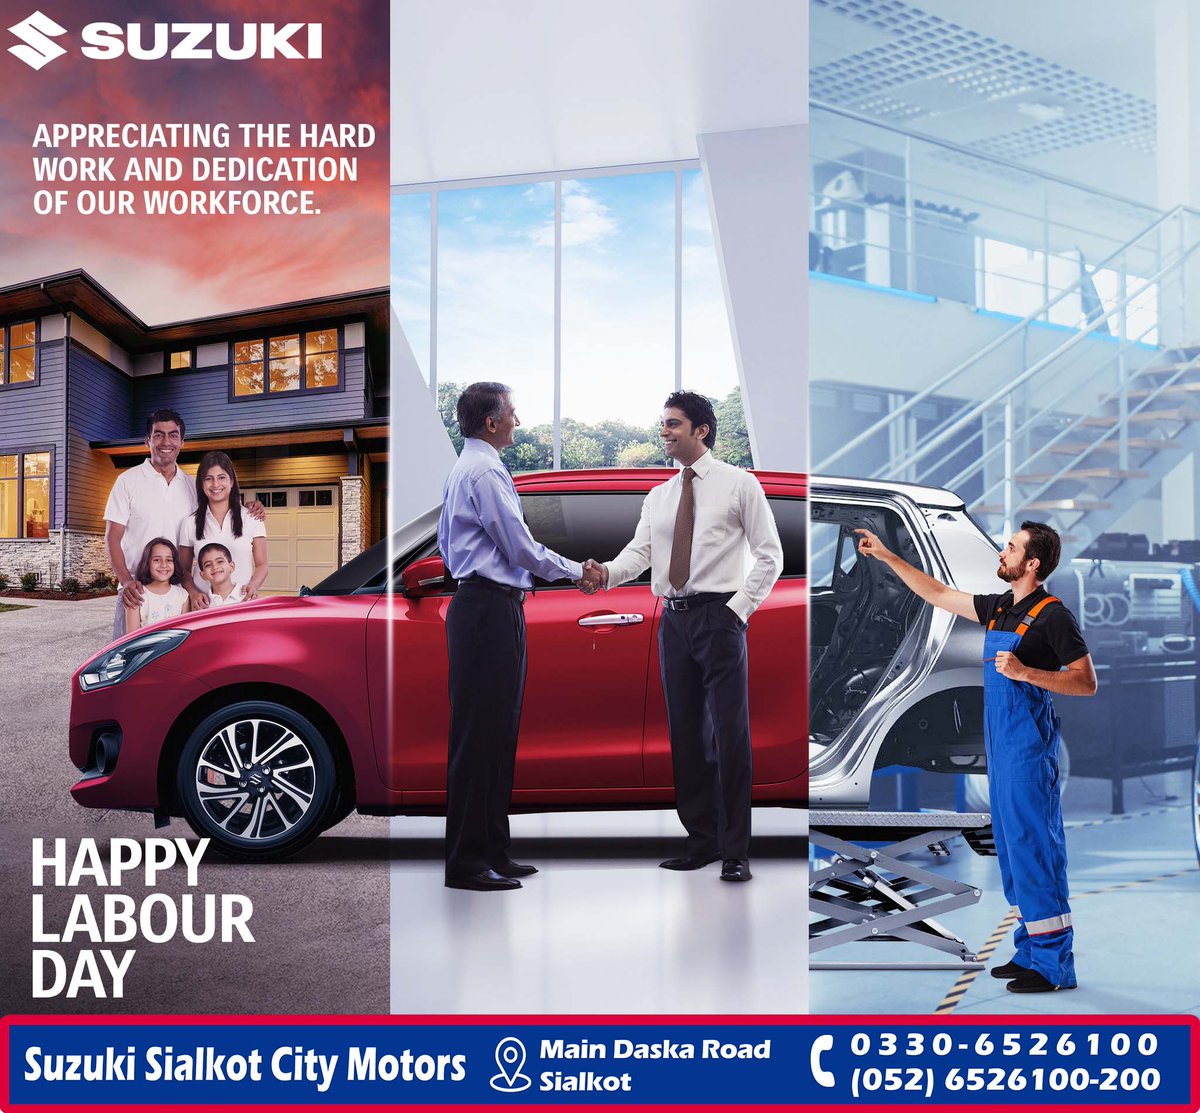 From manufacturing to assembling high quality cars for you all, they put immense hard-work and dedication to bring you the best. Happy Labour Day to all our amazing heroes out there!

#LabourDay #Suzuki #SuzukiSialkotCityMotors #SuzukiPakistan